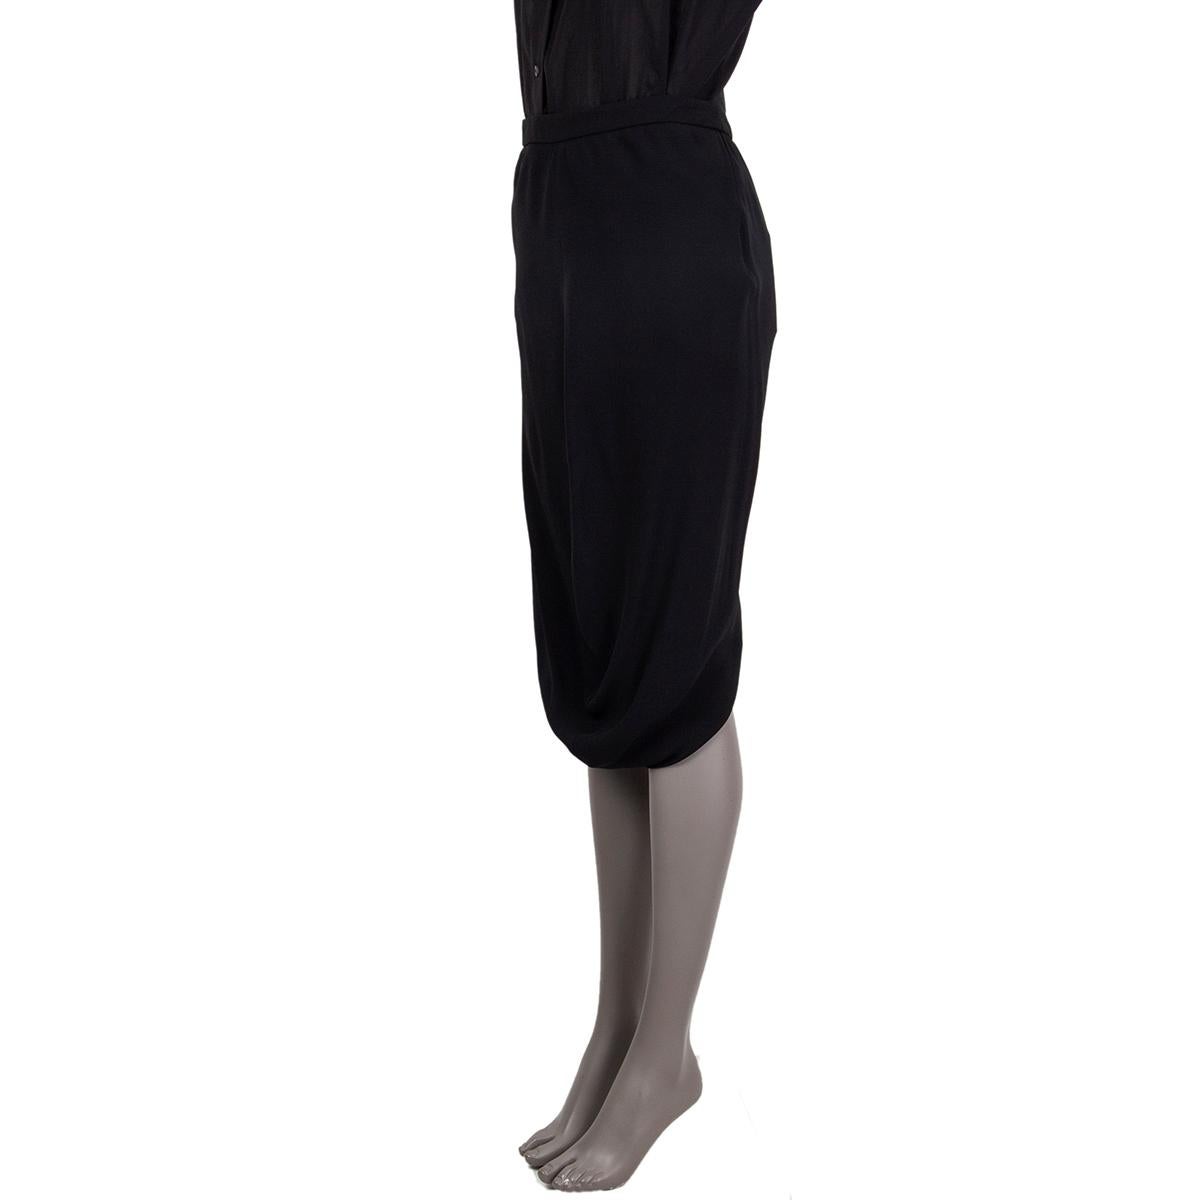 Tom Ford draped pencil skirt in black viscose (60%) and acetate (40%). Opens with a zipper on the back. Lined in acetate (72%) and silk (28%). Brand new. 

Tag Size 38
Size XS
Waist 72cm (28.1in)
Hips 86cm (33.5in)
Length 77cm (30in)